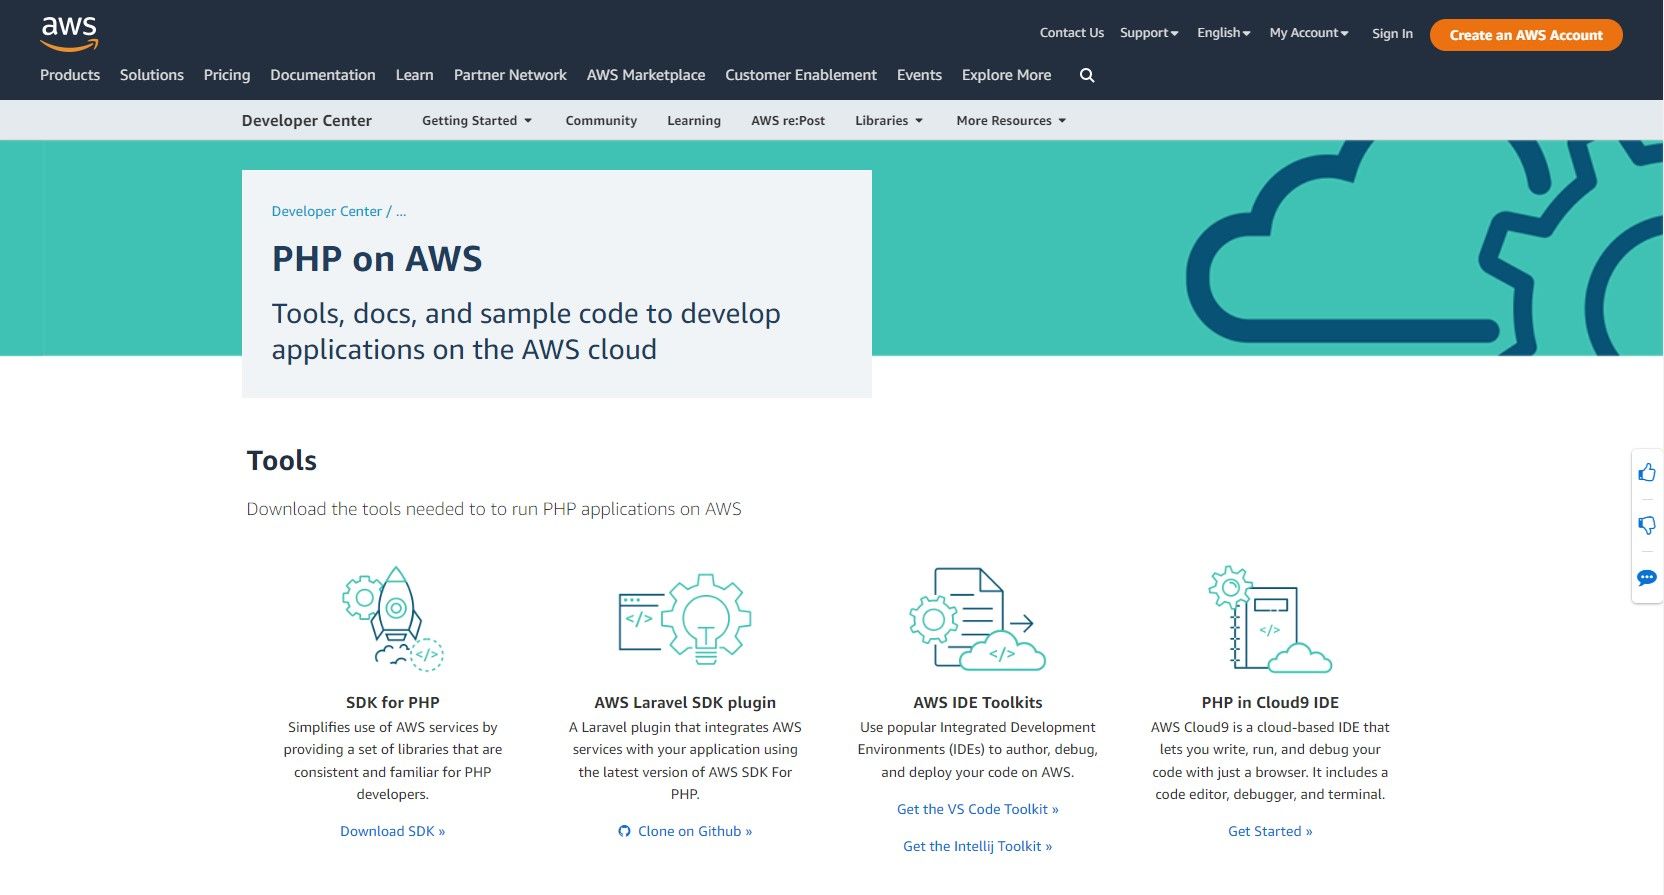 Website interface for PHP on AWS platform